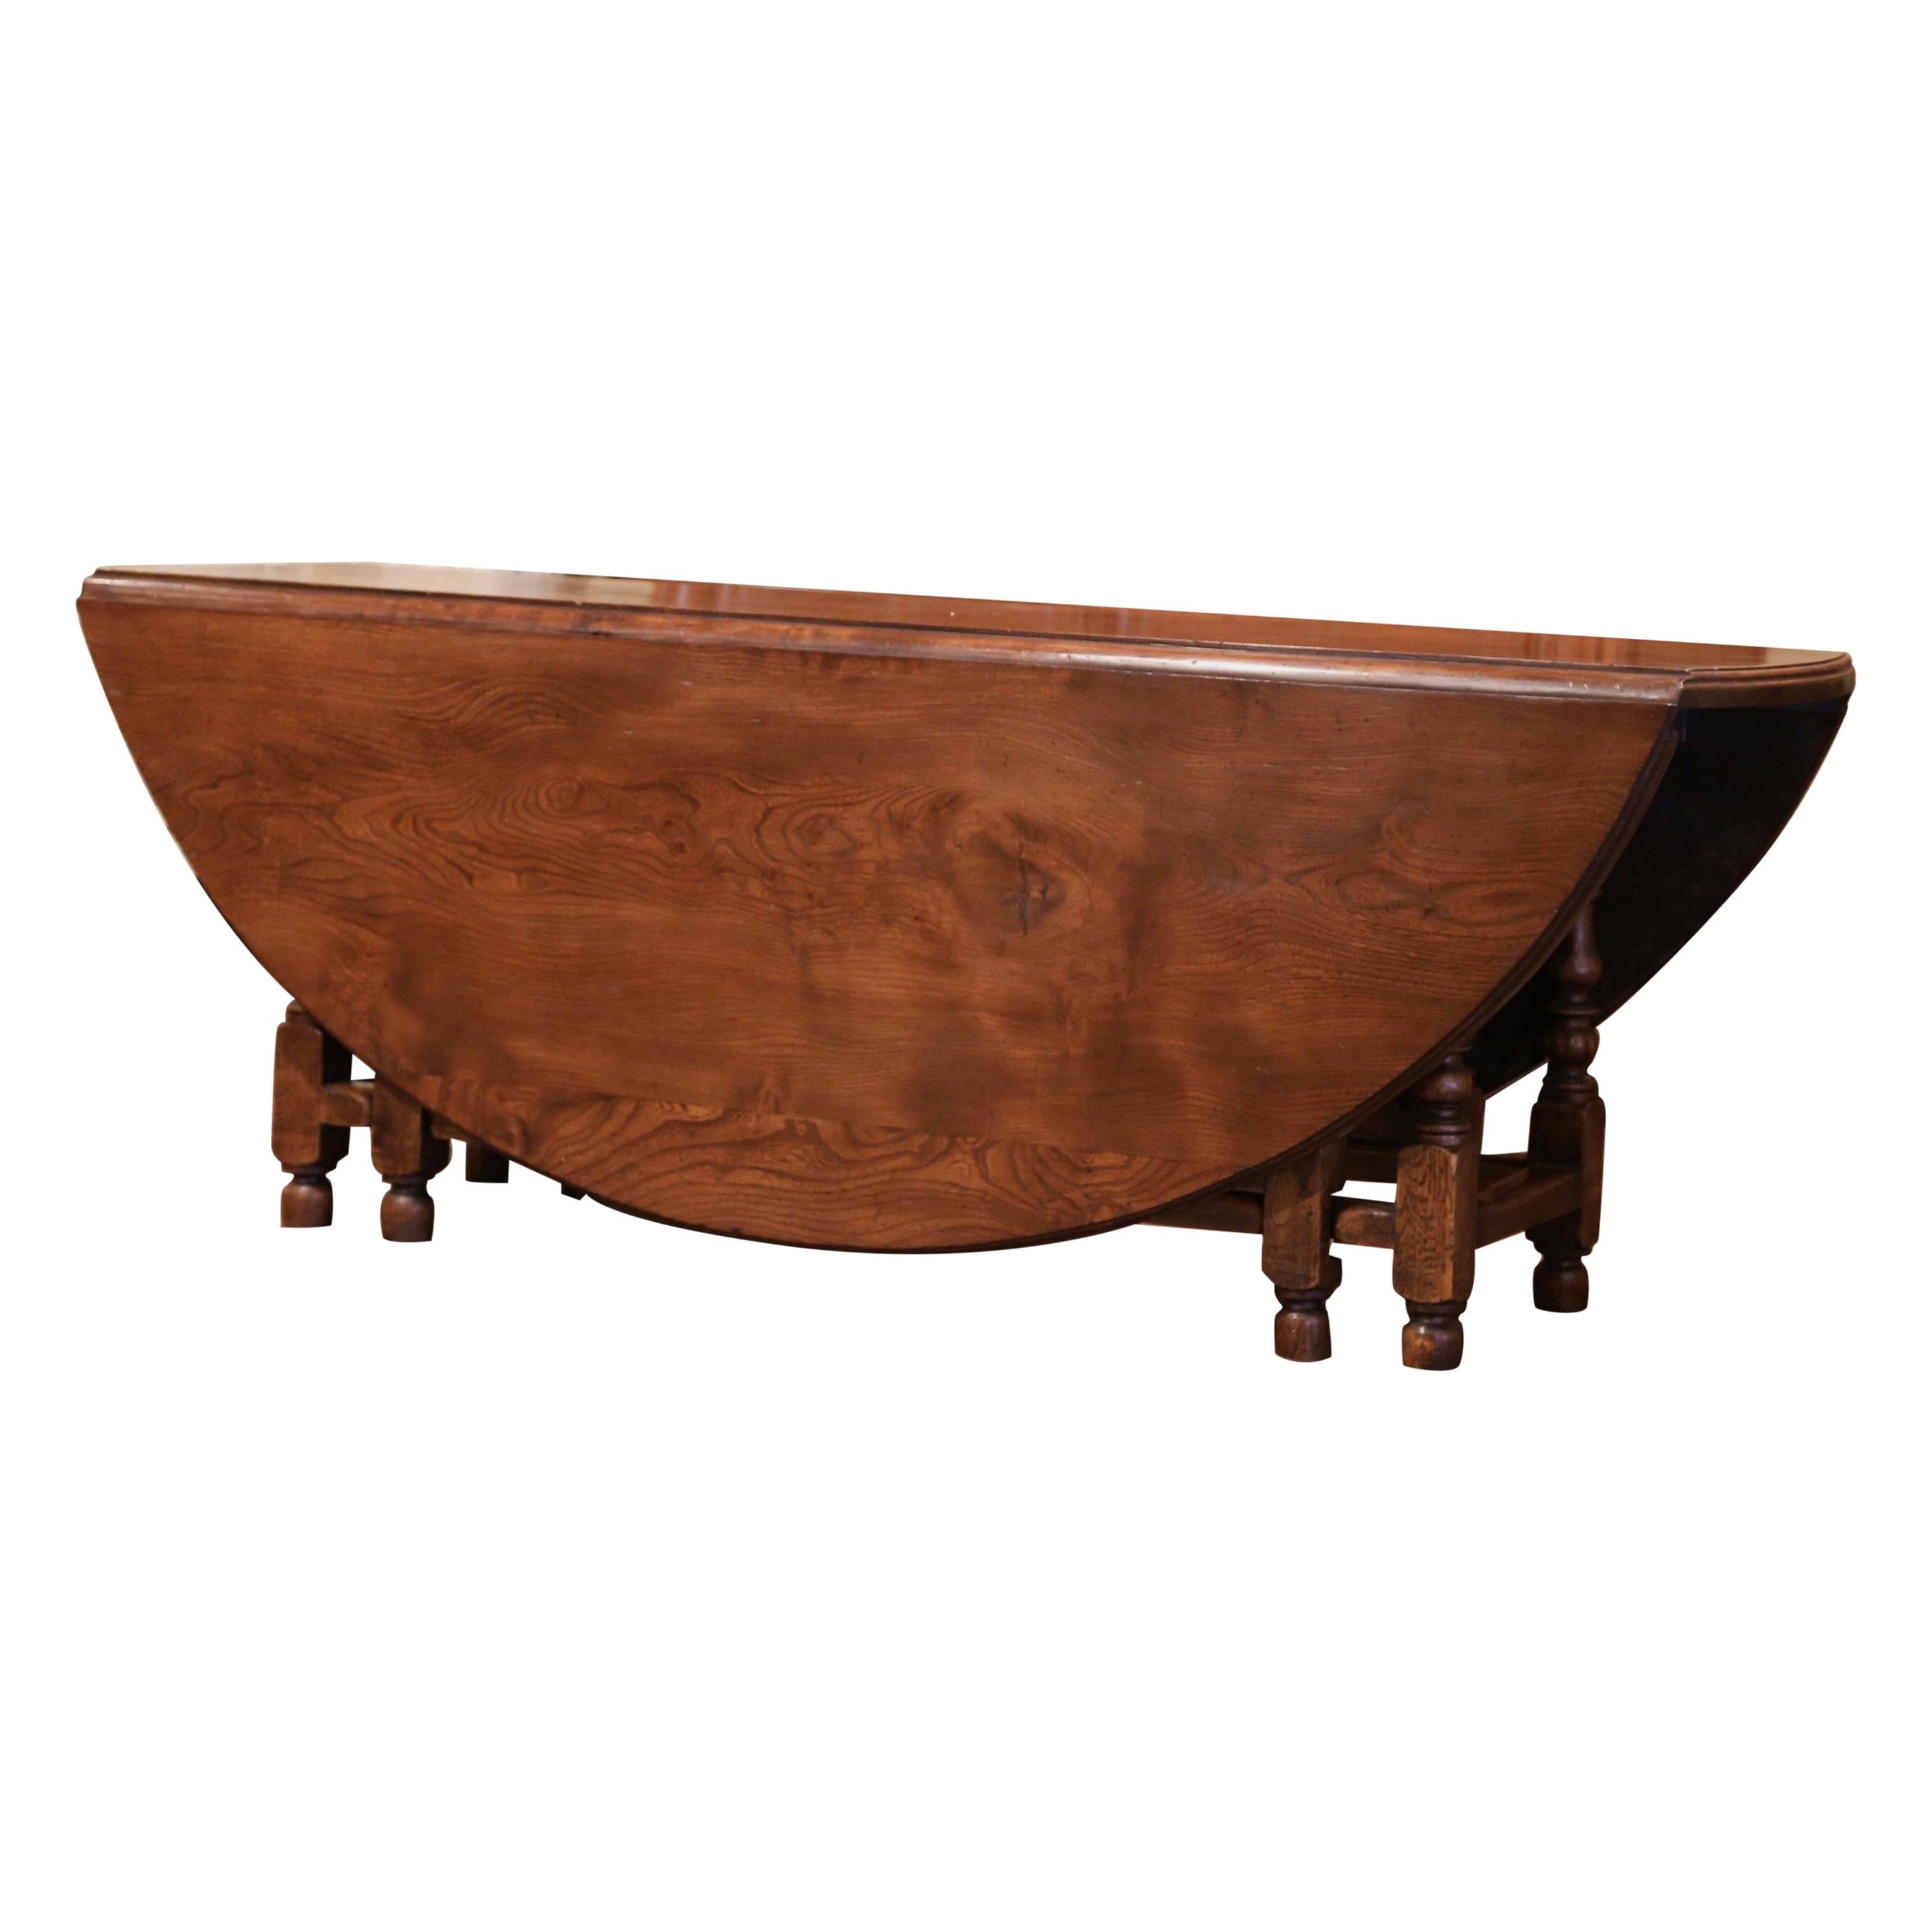 Midcentury English Carved Chestnut Eight Gate-Leg Drop-Leaf Oval Table